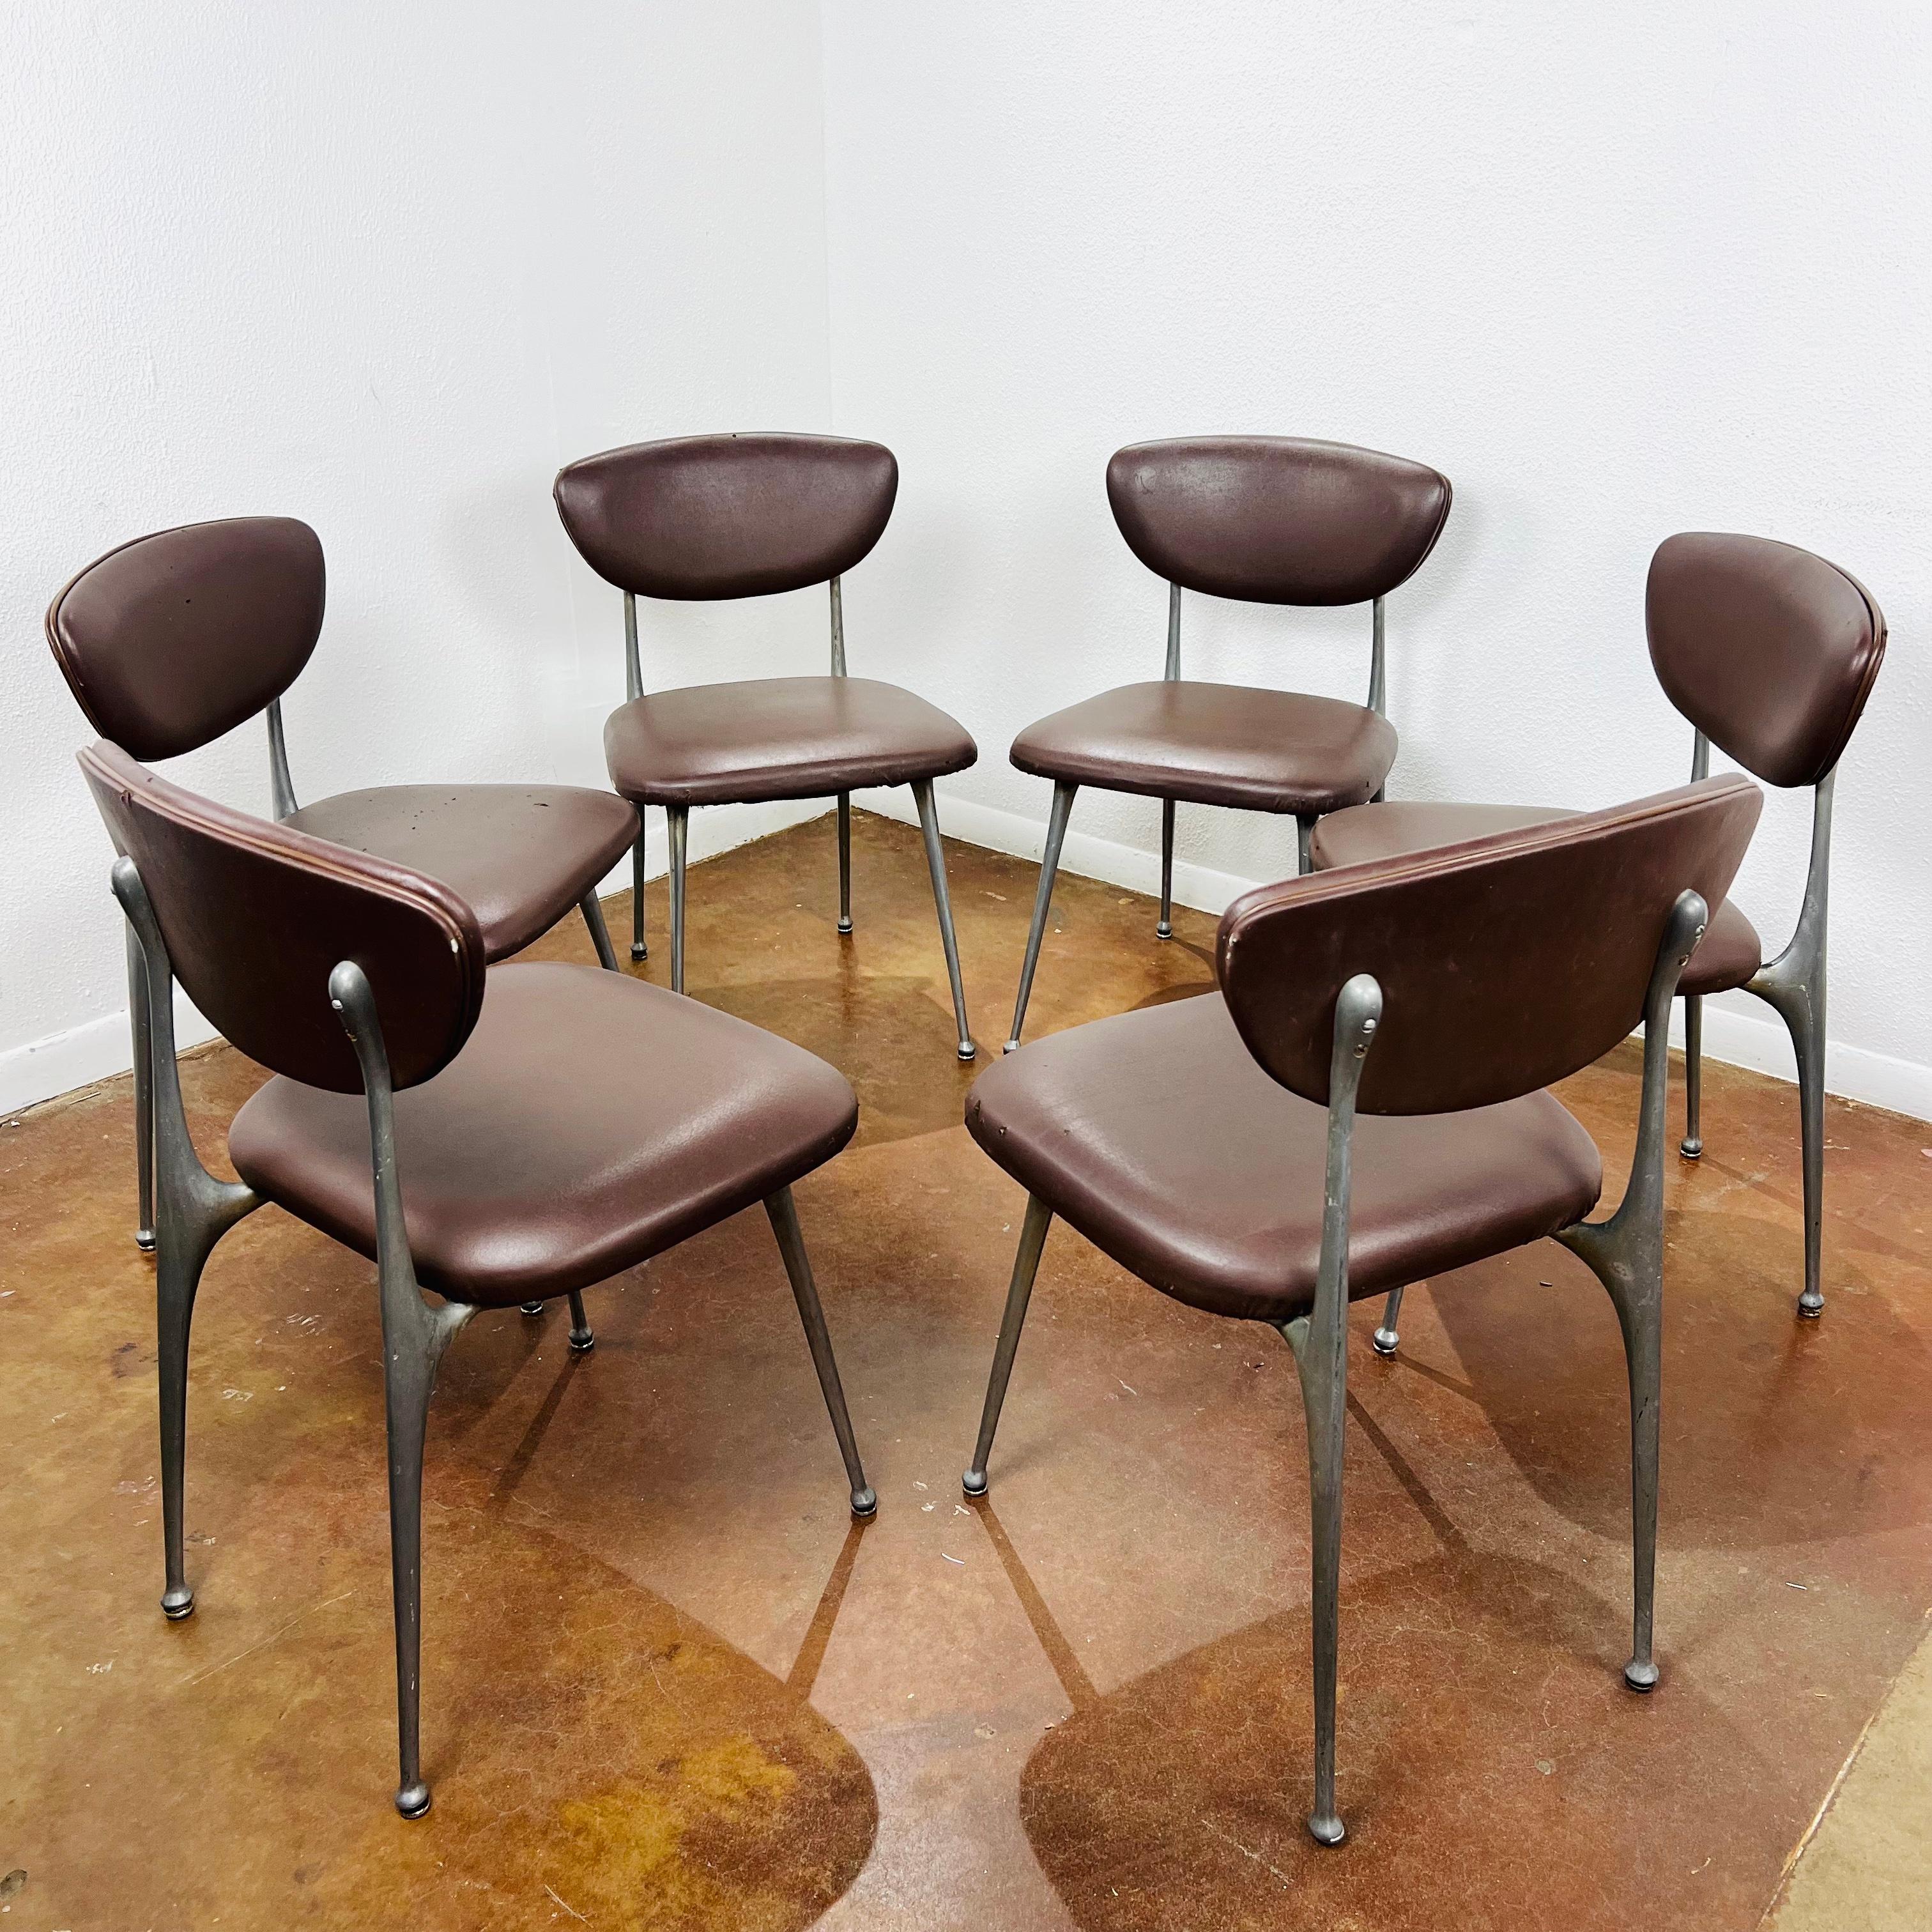 Mid-Century Modern Set of 8 Aluminum Gazelle Chairs by Shelby Williams